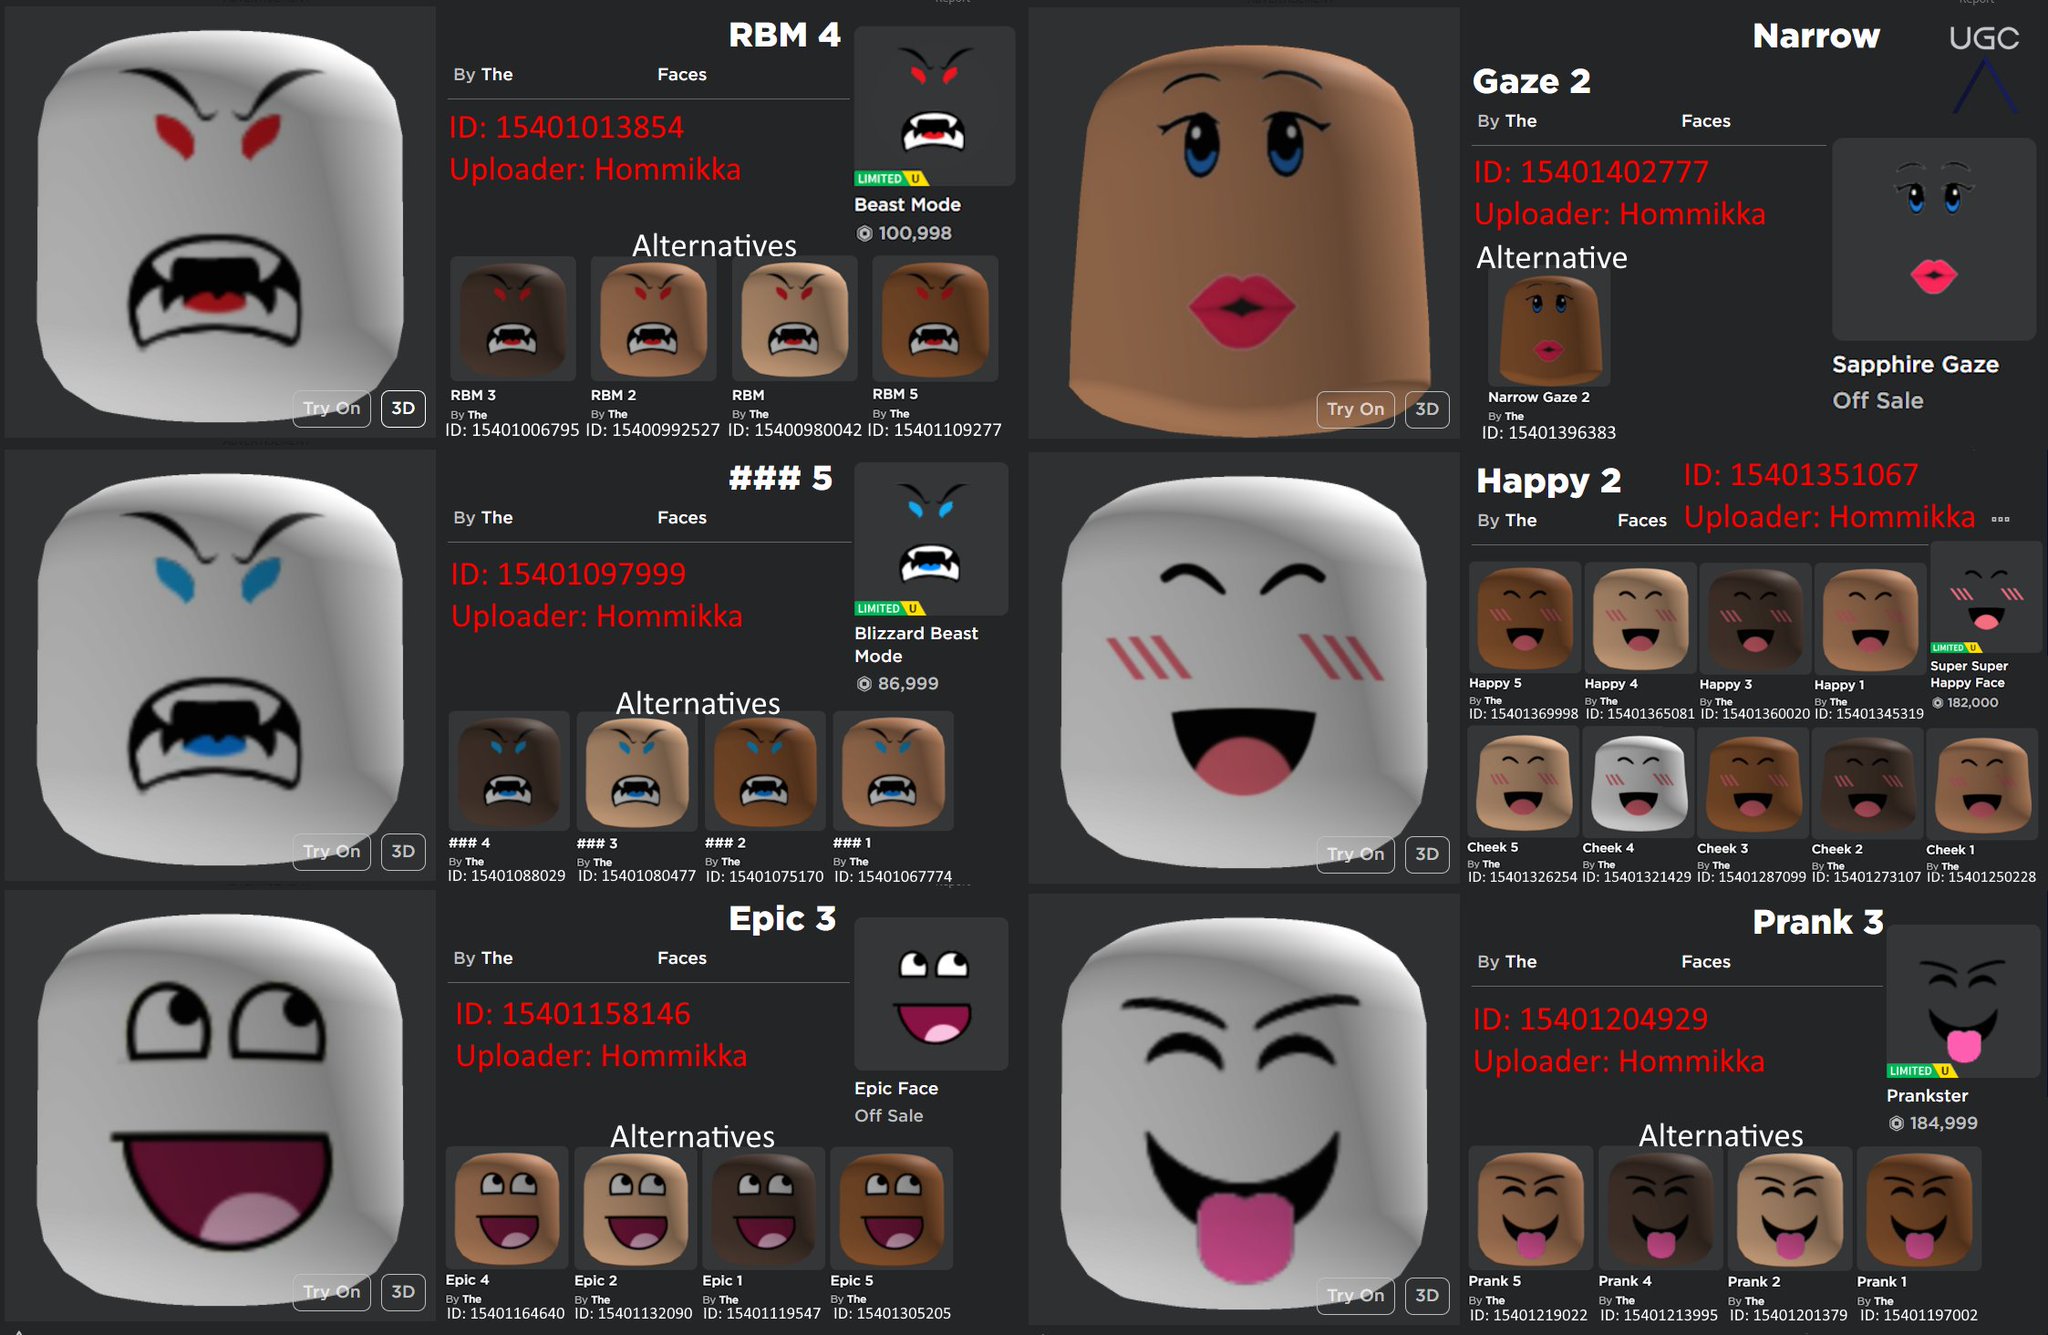 “Peak” UGC on X: UGC creator Hommikka uploaded 32 1:1 copies of the  limited faces Beast Mode, Blizzard Beast Mode, Epic Face, Sapphire  Gaze, Super Super Happy Face, and Prankster. #Roblox #RobloxUGC